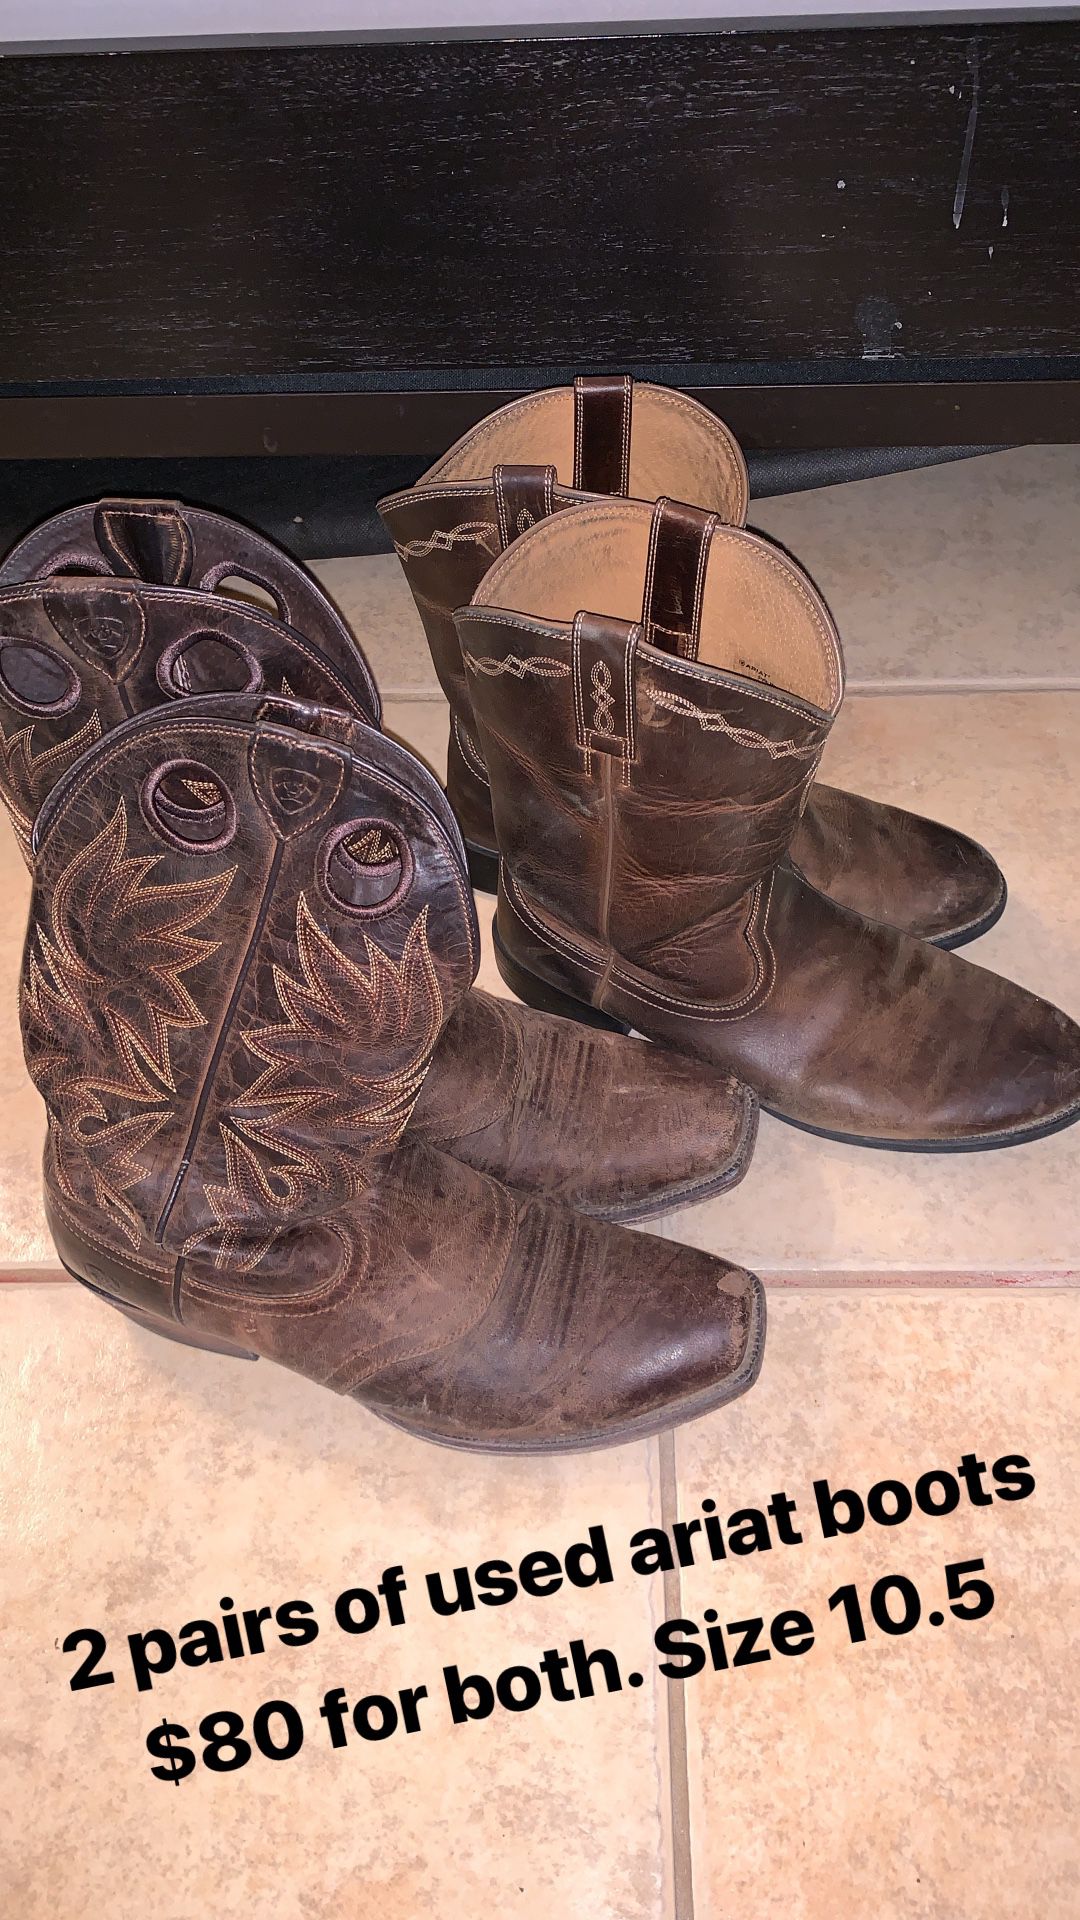 Ariat Boots size 10.5